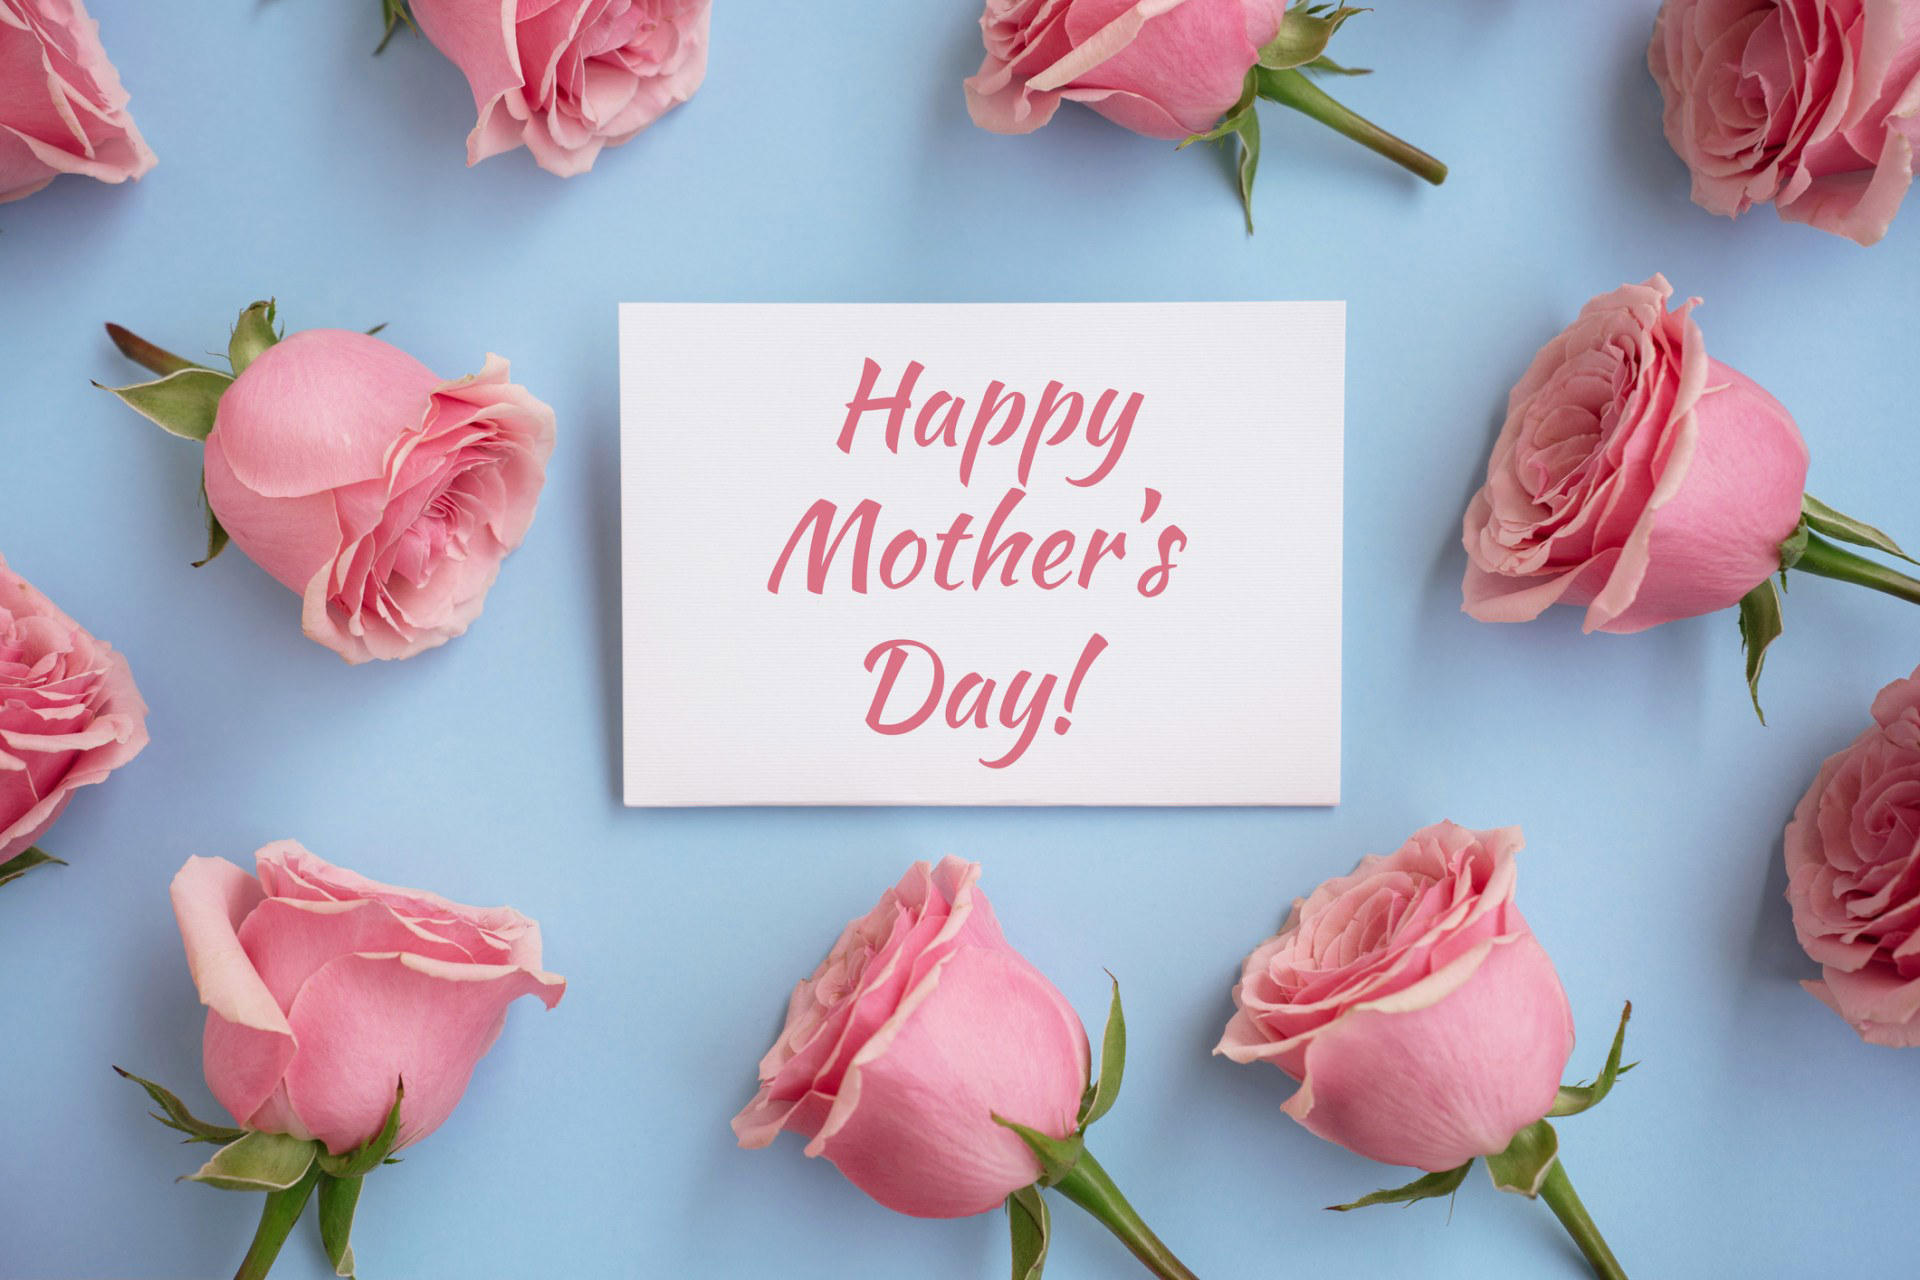 When is Mother's Day in the UK and why is it different from the US?